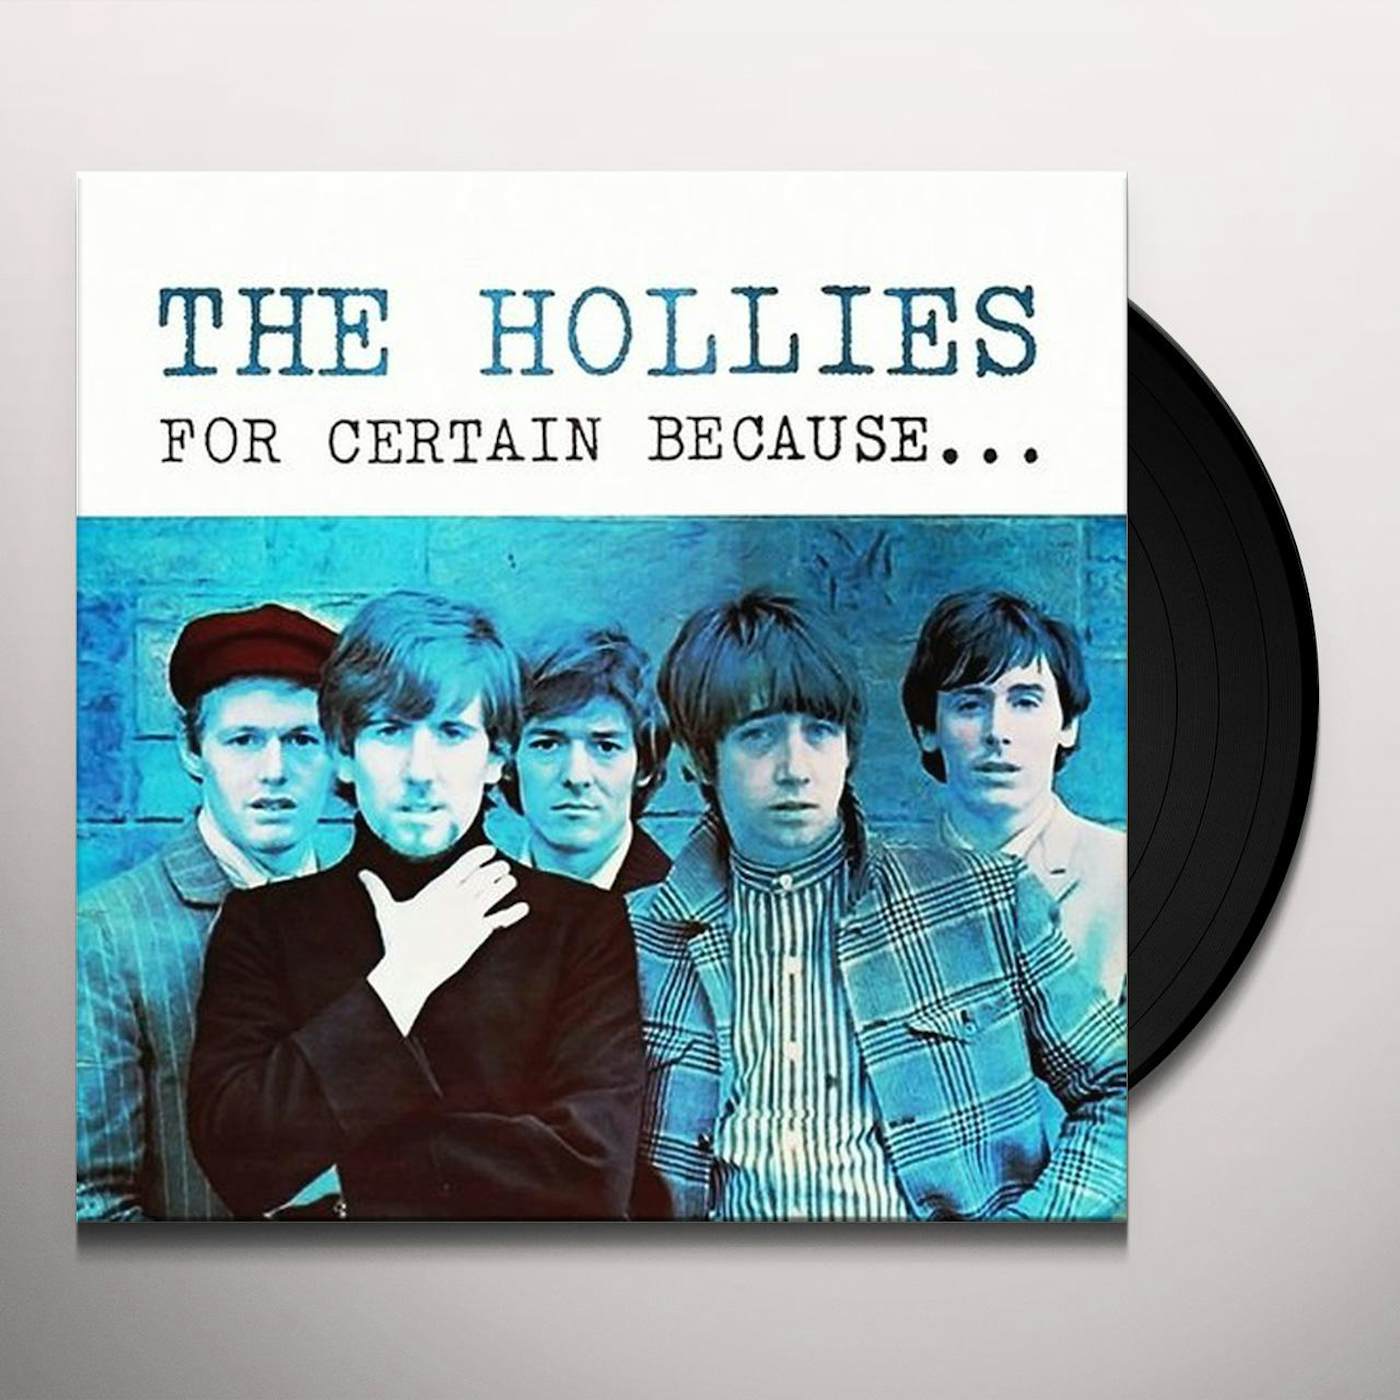 The Hollies FOR CERTAIN BECAUSE... (STOP! STOP! STOP!) Vinyl Record